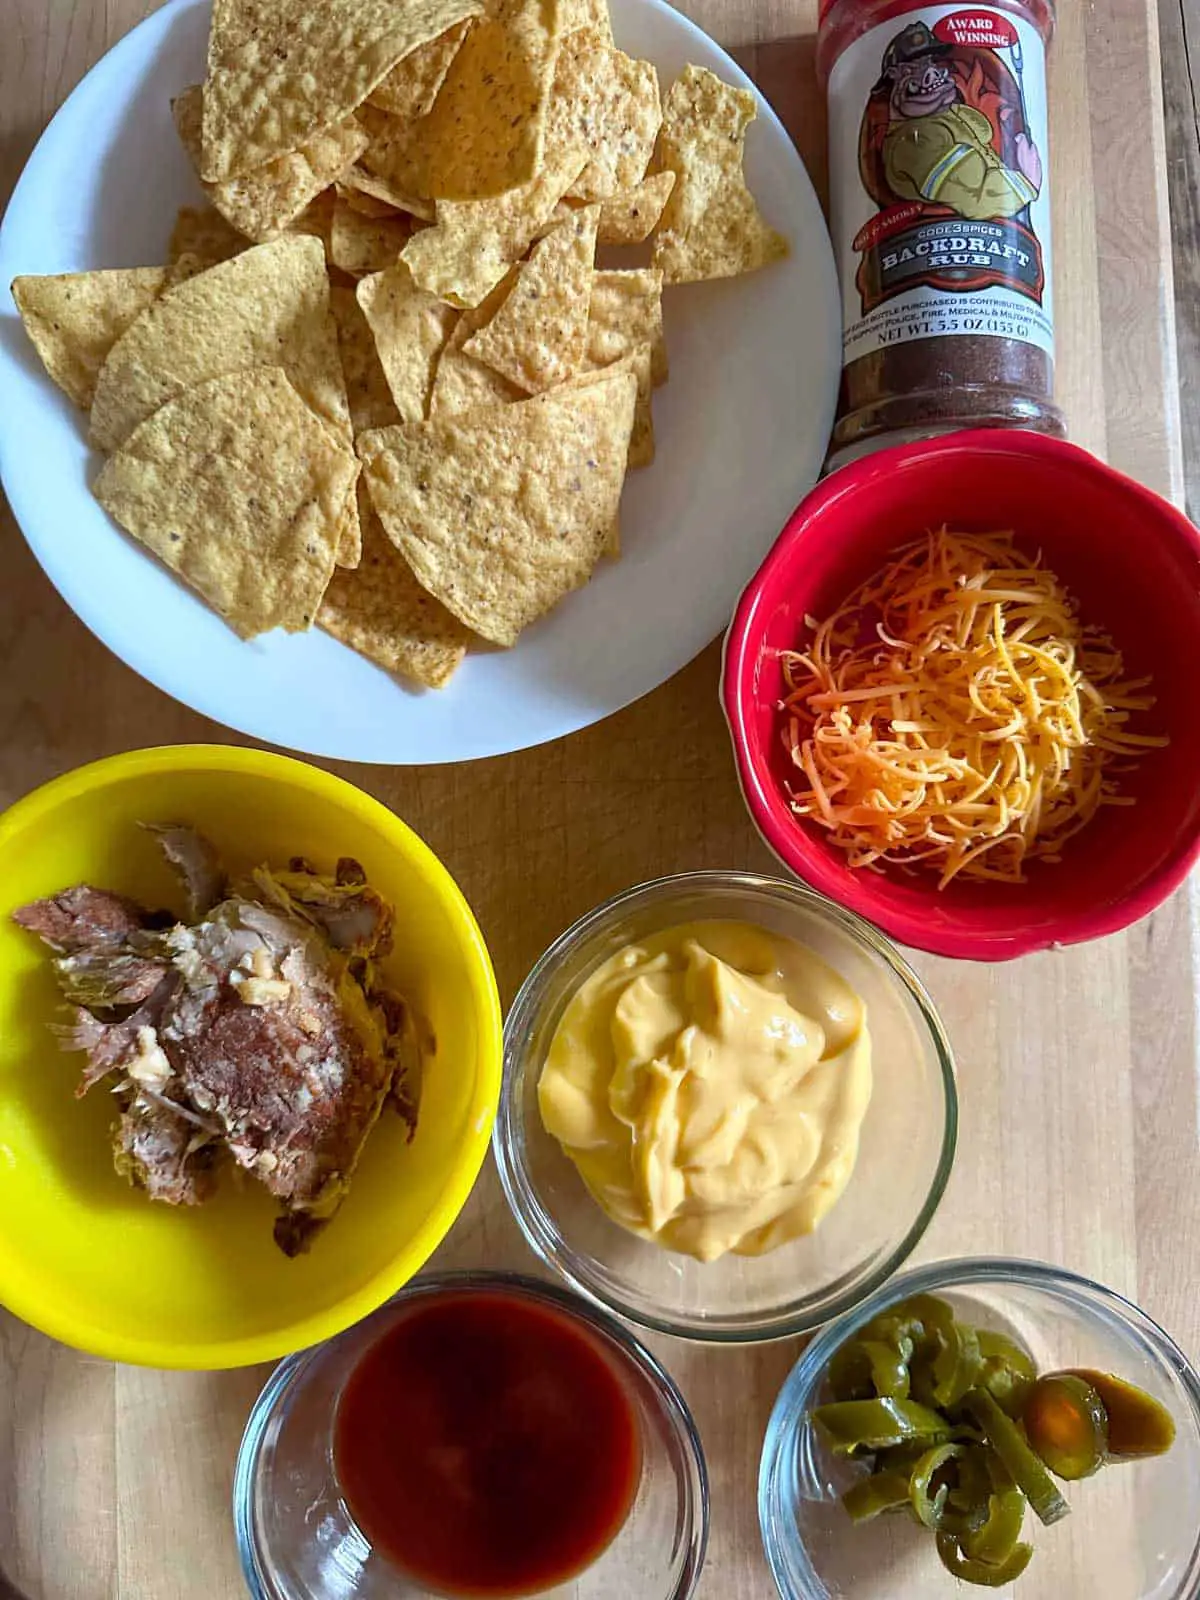 Tortilla chips in a white bowl, a bottle of Backdraft Rub, shredded cheese in a red bowl, pulled pork in a yellow bowl, and nacho cheese sauce, barbecue sauce and jalapeños in small glass bowls.